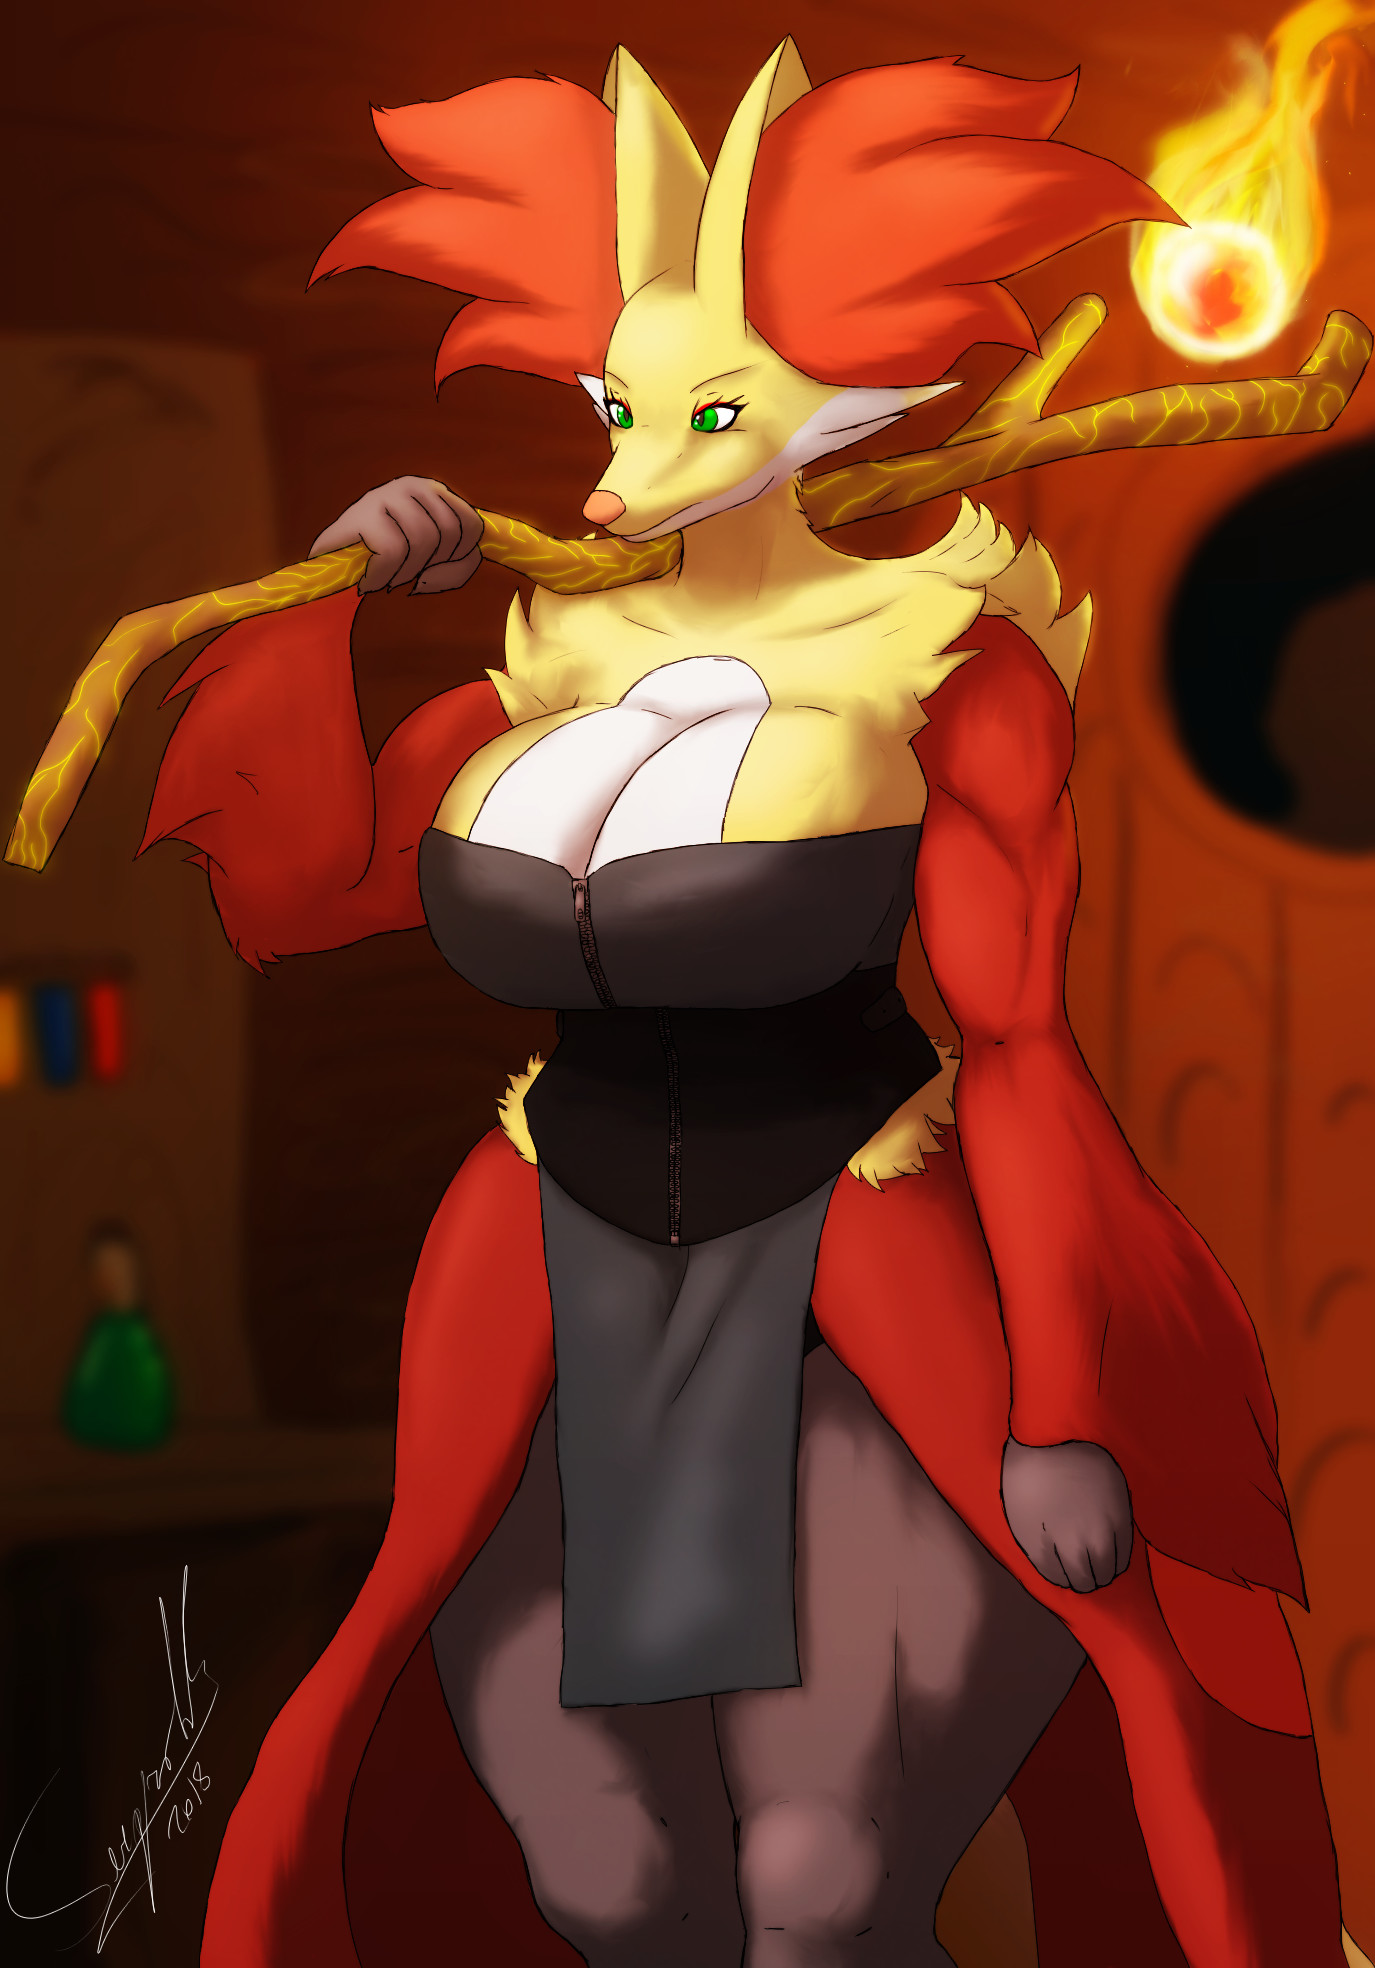 I like this take on Delphox's weapon. 